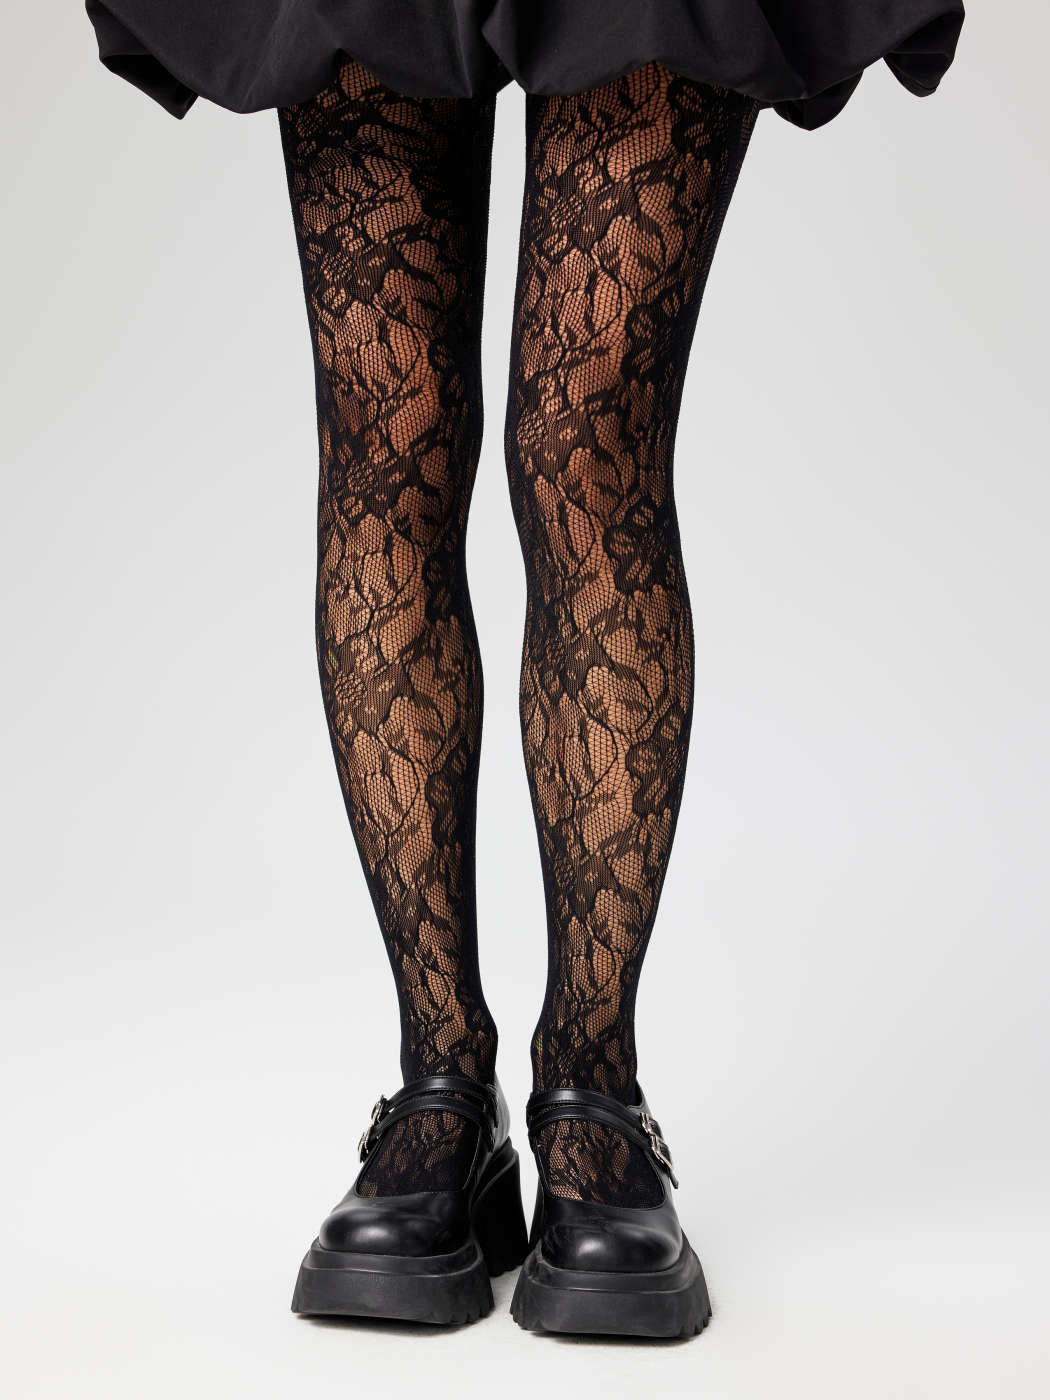 Lace Tights from Tights Tights Tights